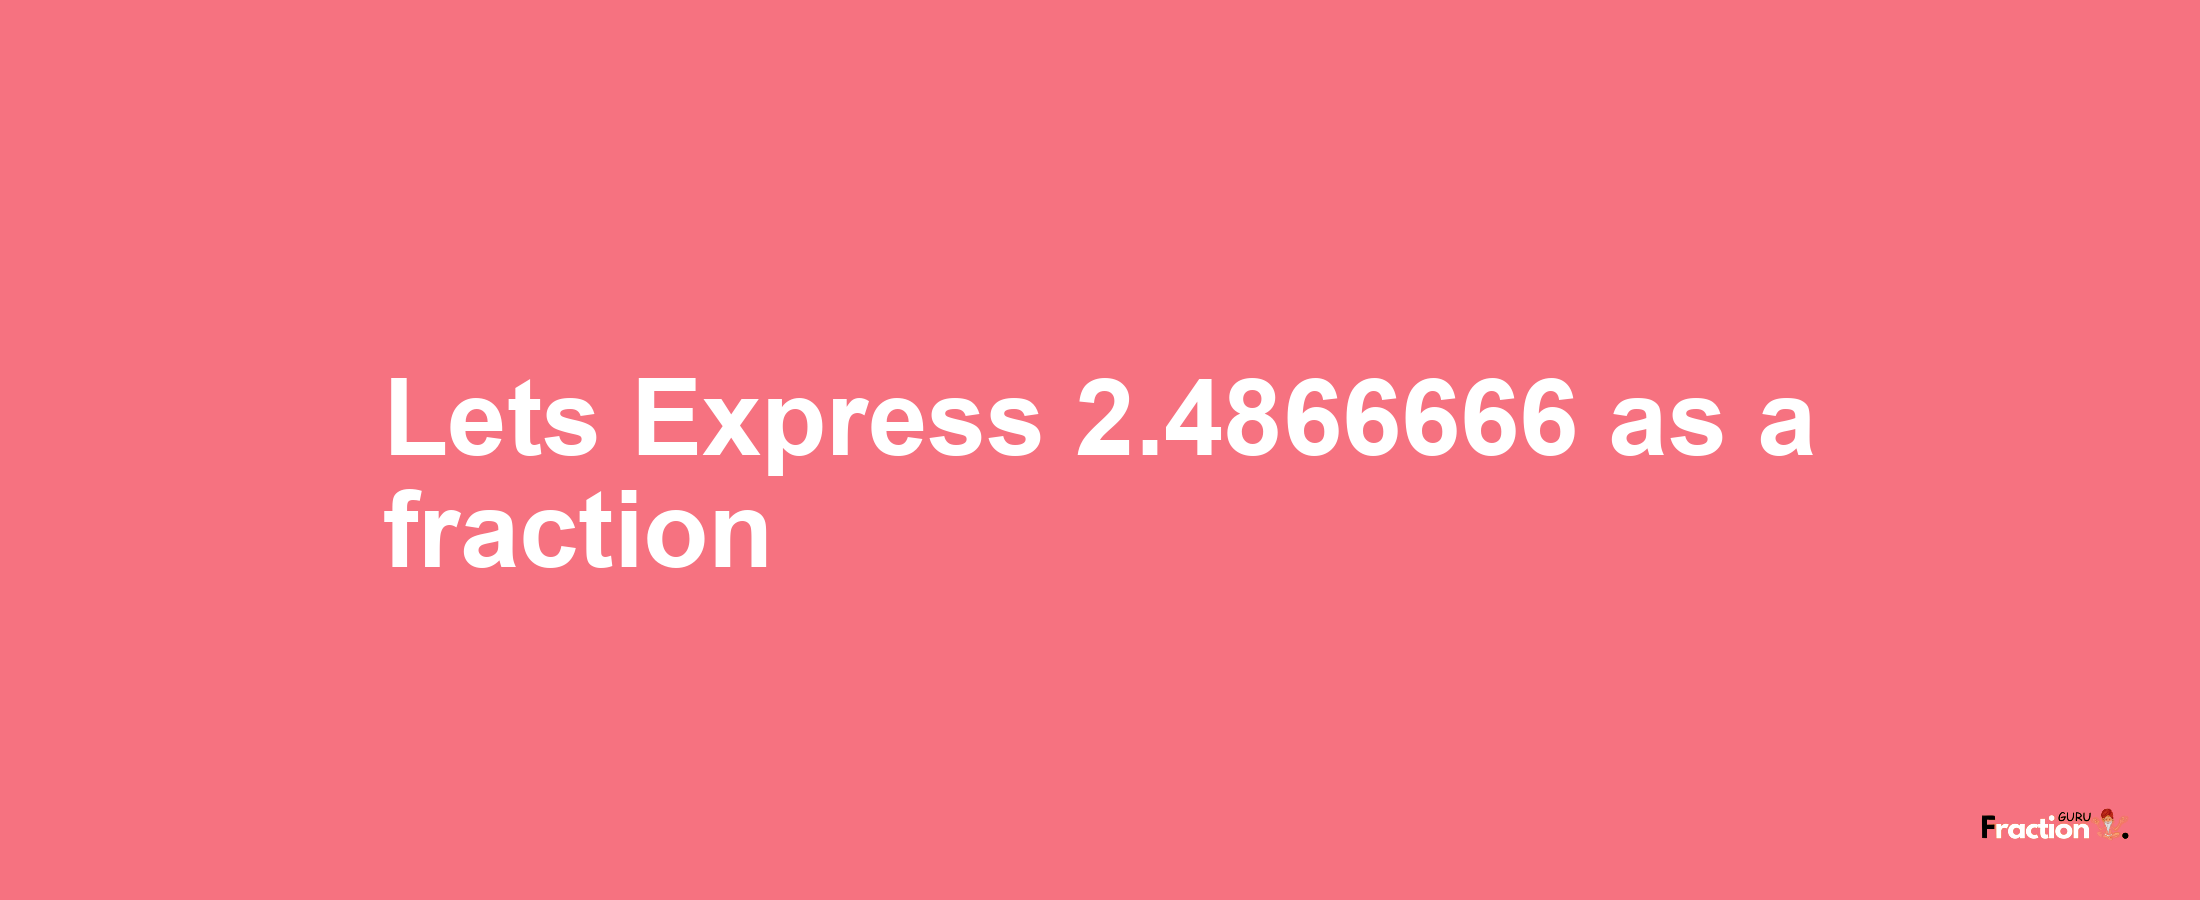 Lets Express 2.4866666 as afraction